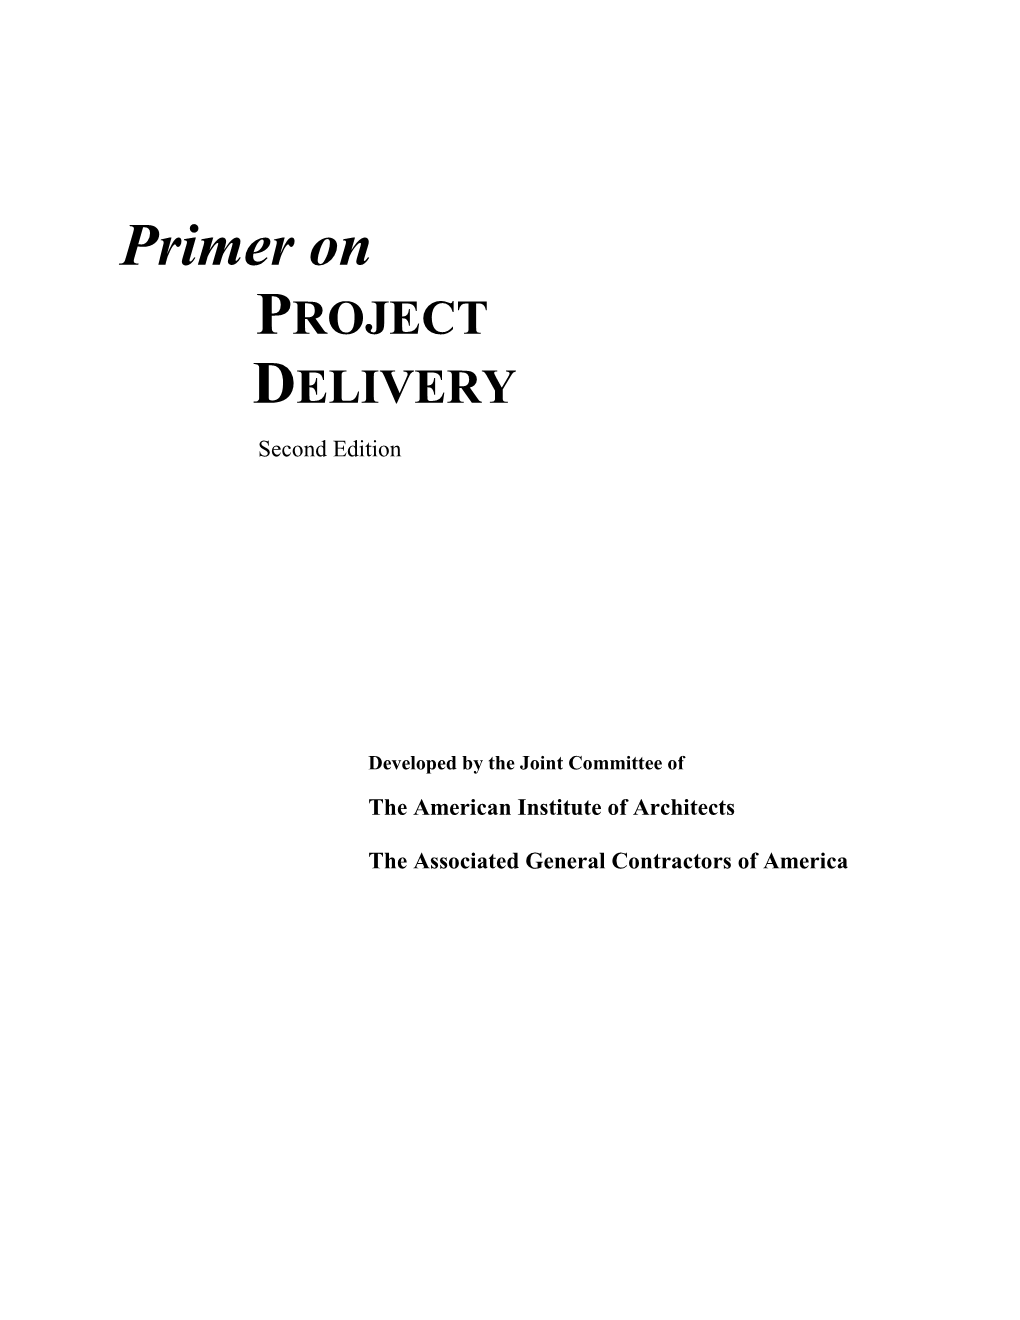 AGC–AIA Primer on Project Delivery